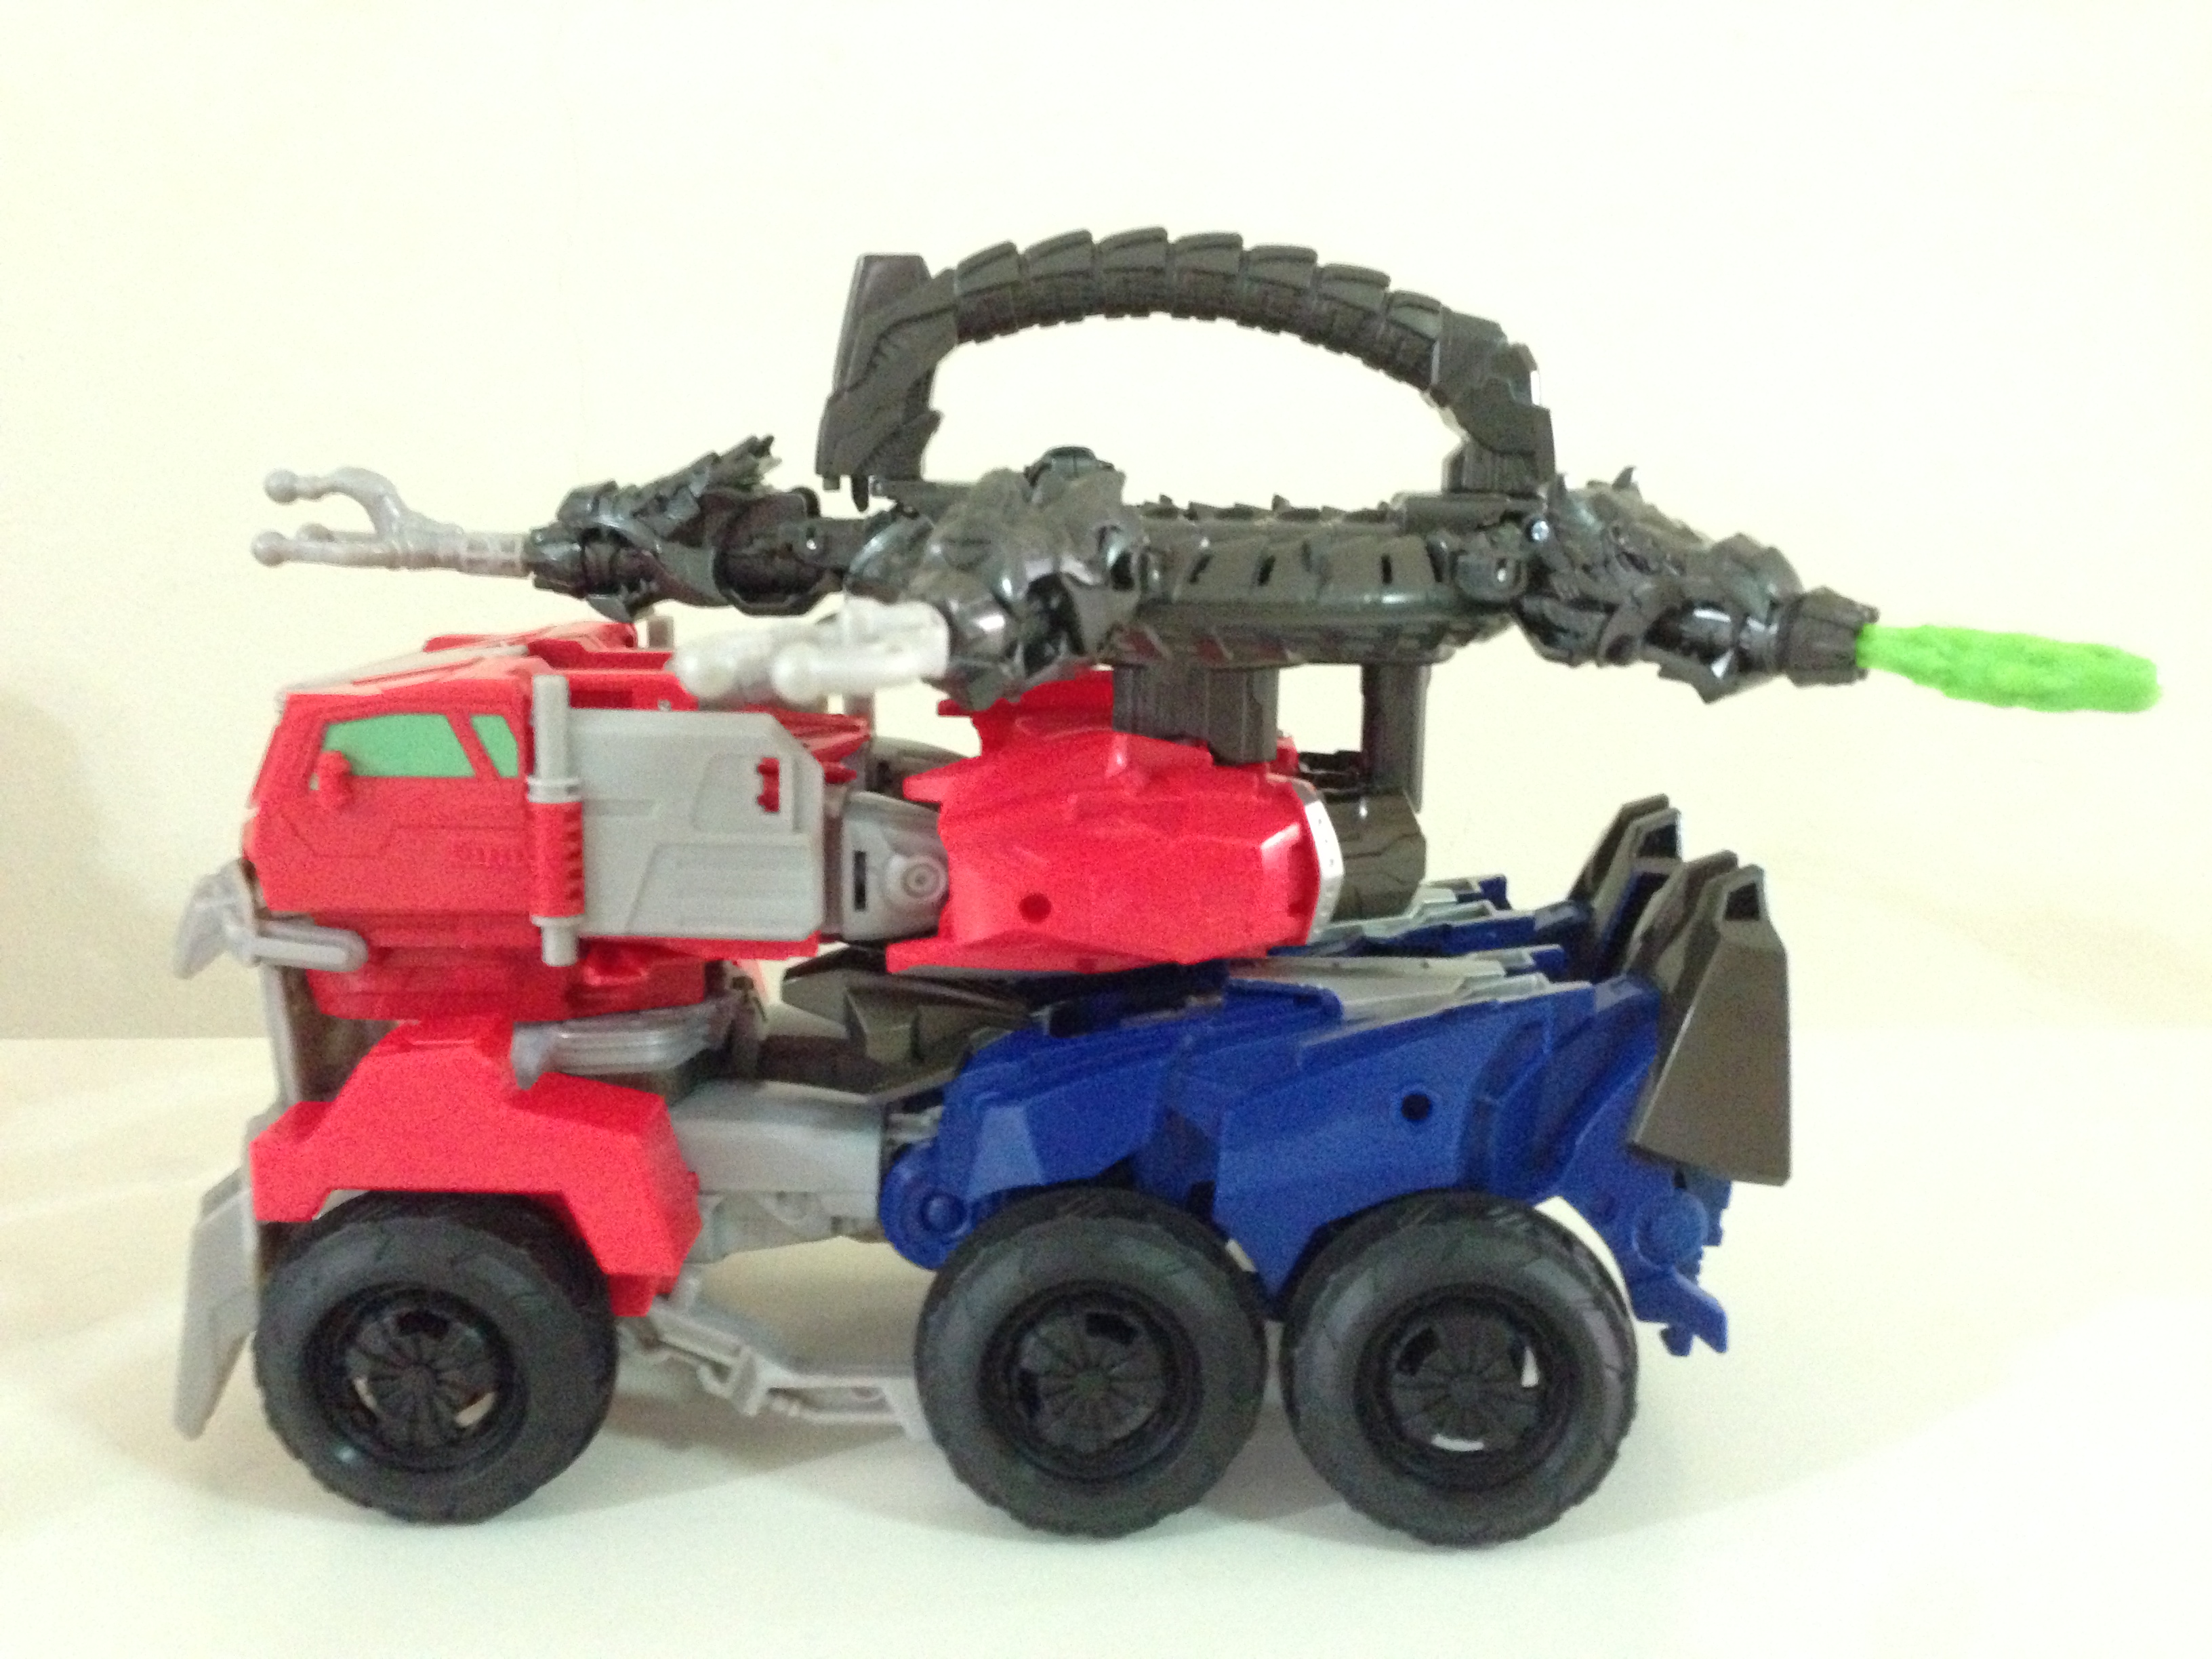 LEGO MOC Optimus Prime from Beast Hunters show by Tykenen